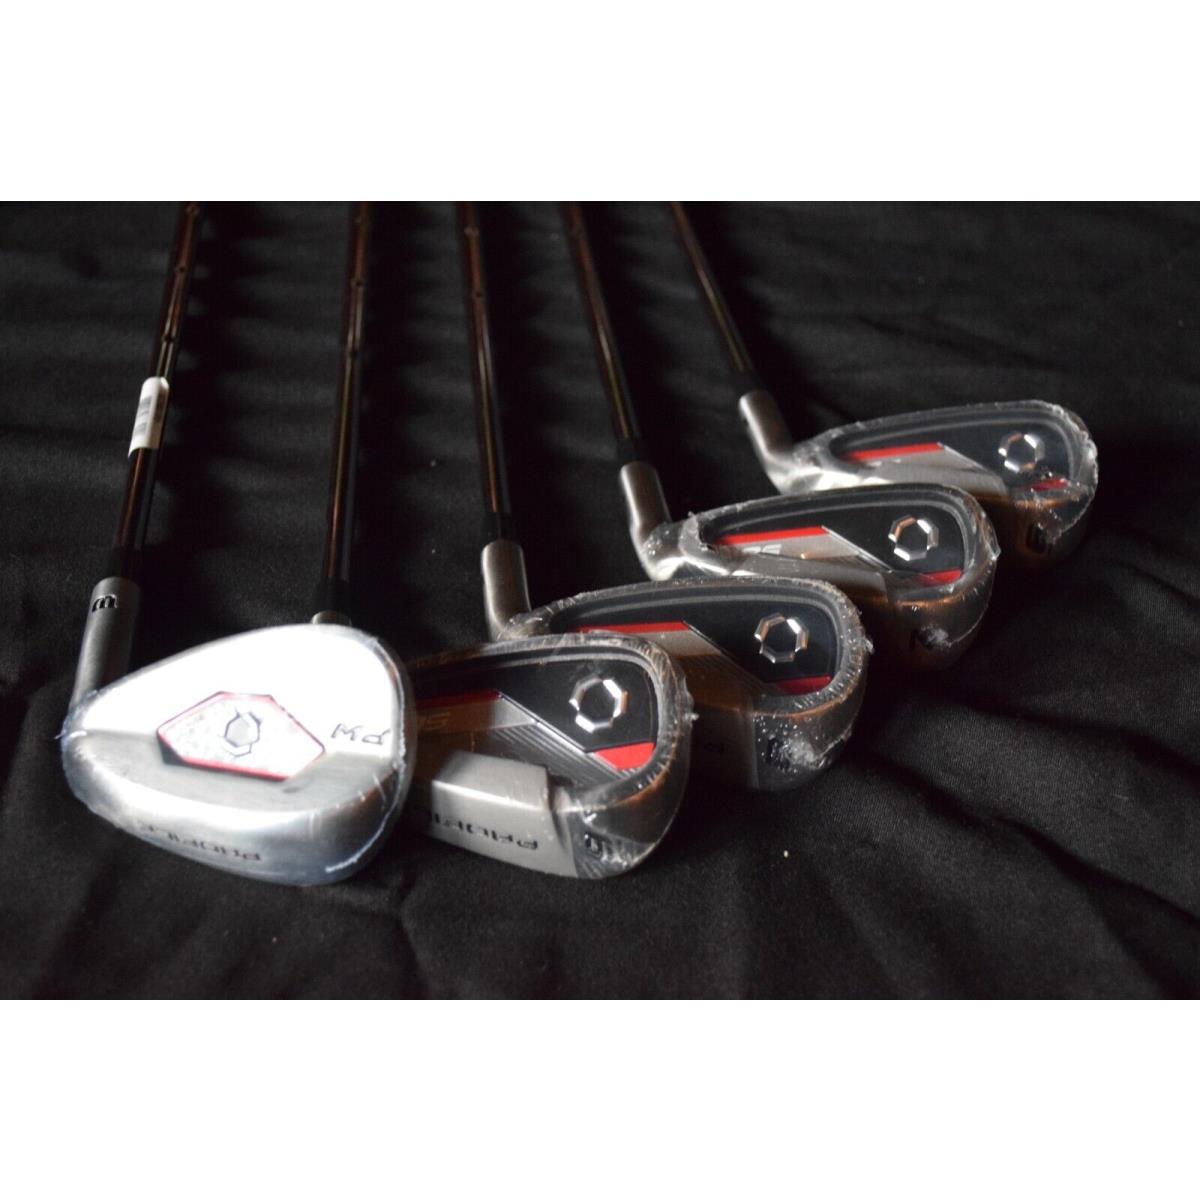 Offer Wilson Profile Iron Set Includes 5HYBRID 6 7 8 9 PW SW 7CLUBS